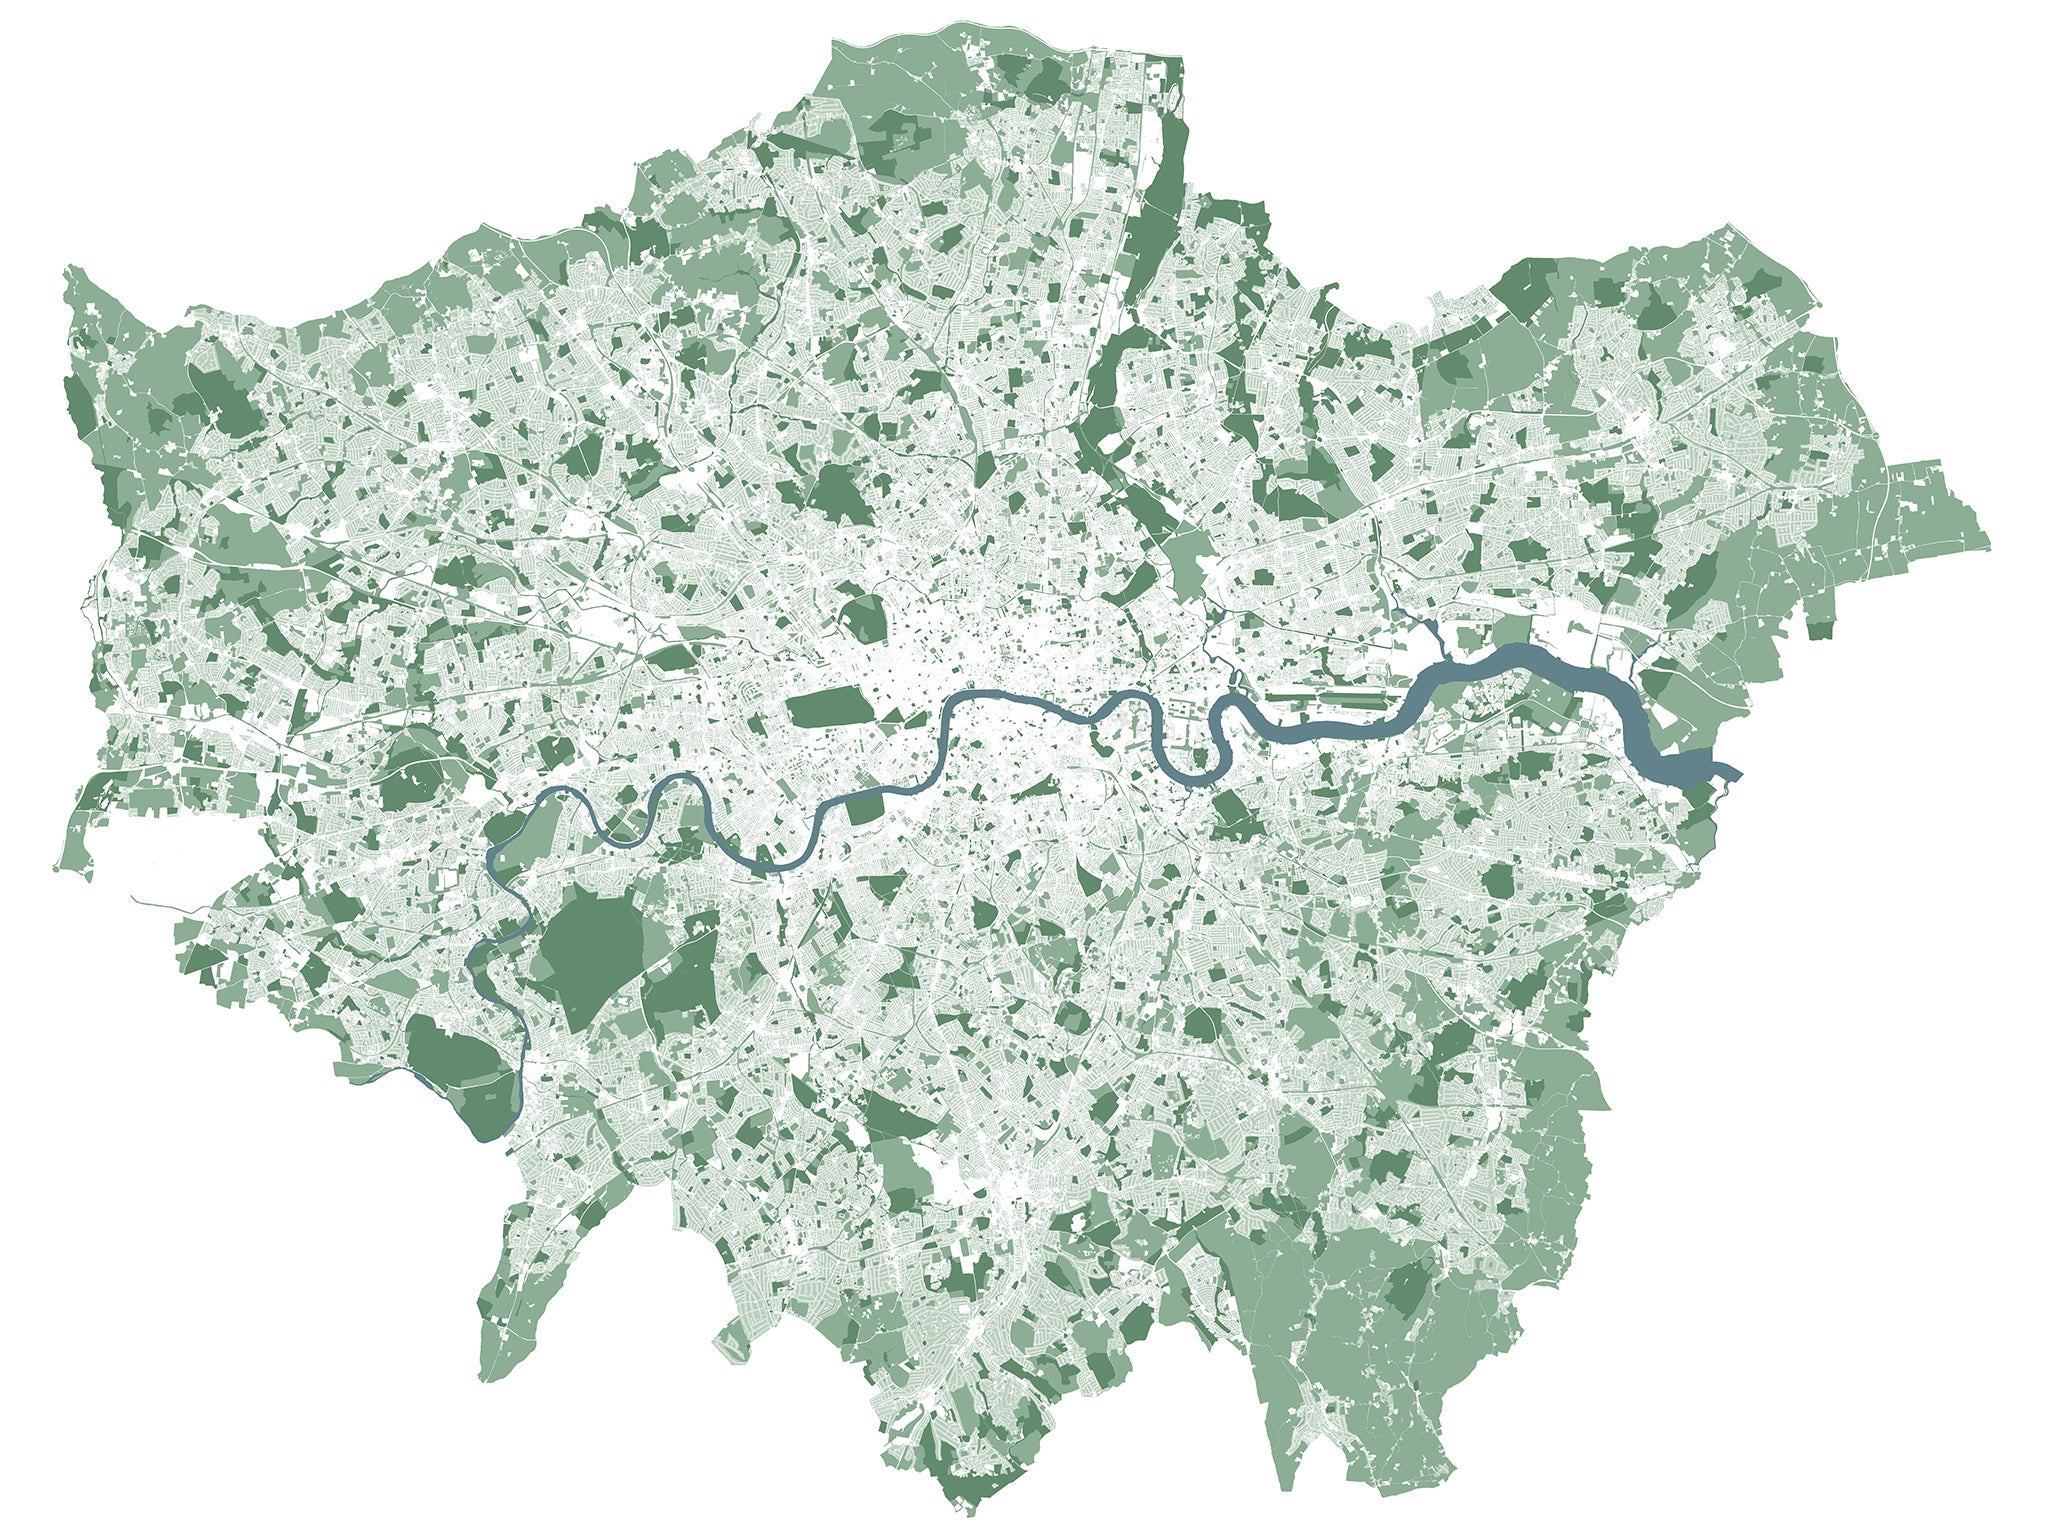 This new map, produced by Greenspace Information for Greater London (Gigl.org.uk) for the proposed Greater London National Park, shows only rivers and green space. It features no roads, buildings or other structures. 